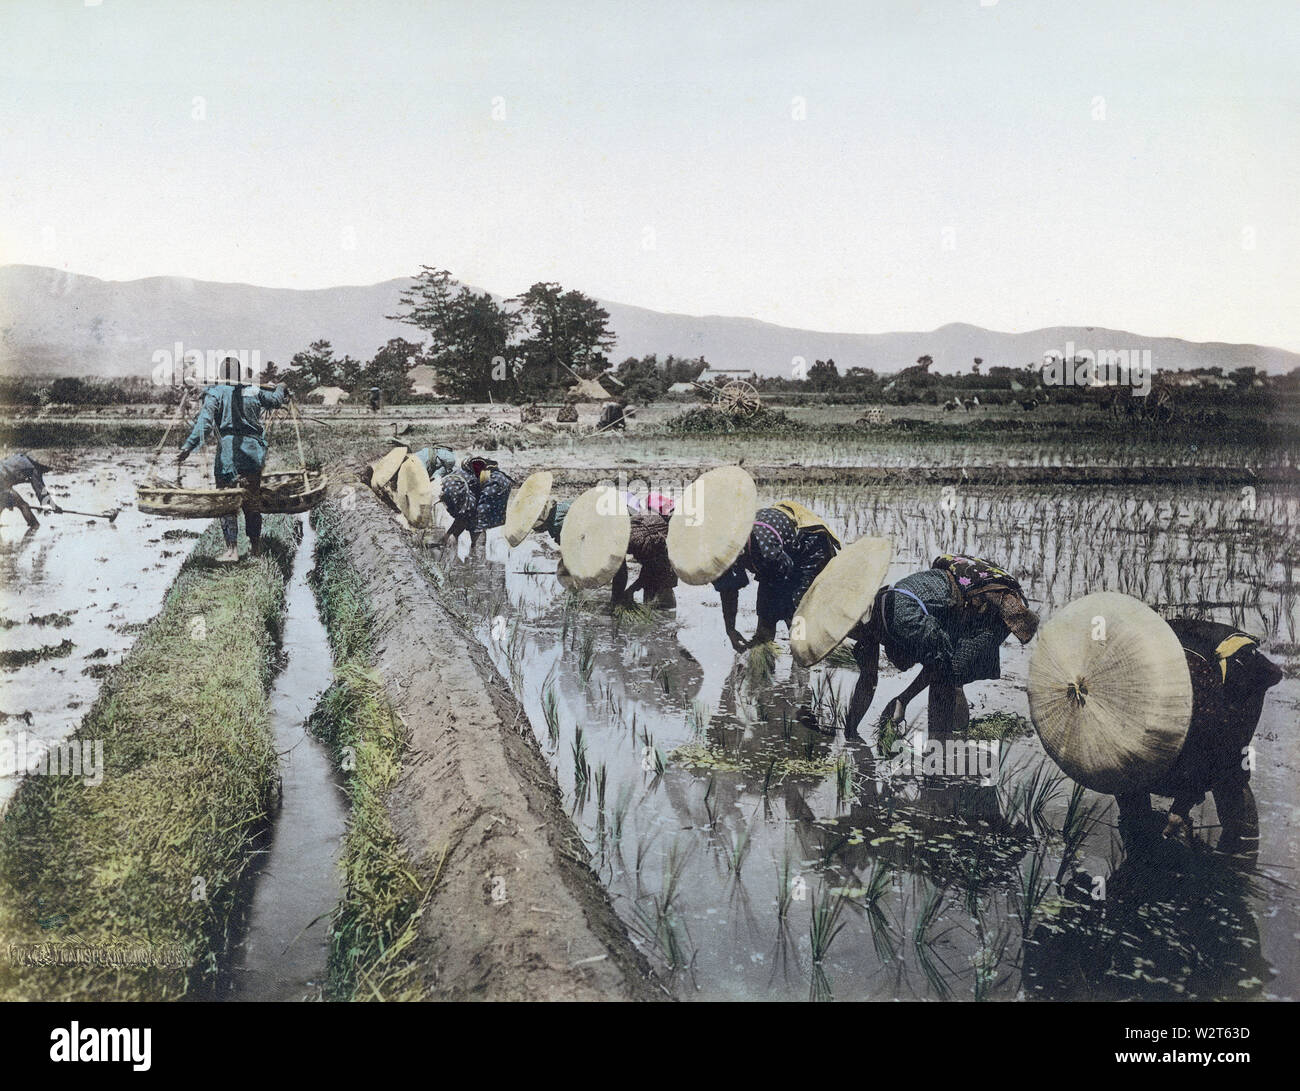 [ 1890s Japan - Japanese Farmers Planting Rice ] —   Women in traditional clothing are transplanting rice seedlings. This process is called taue in Japanese.  19th century vintage albumen photograph. Stock Photo